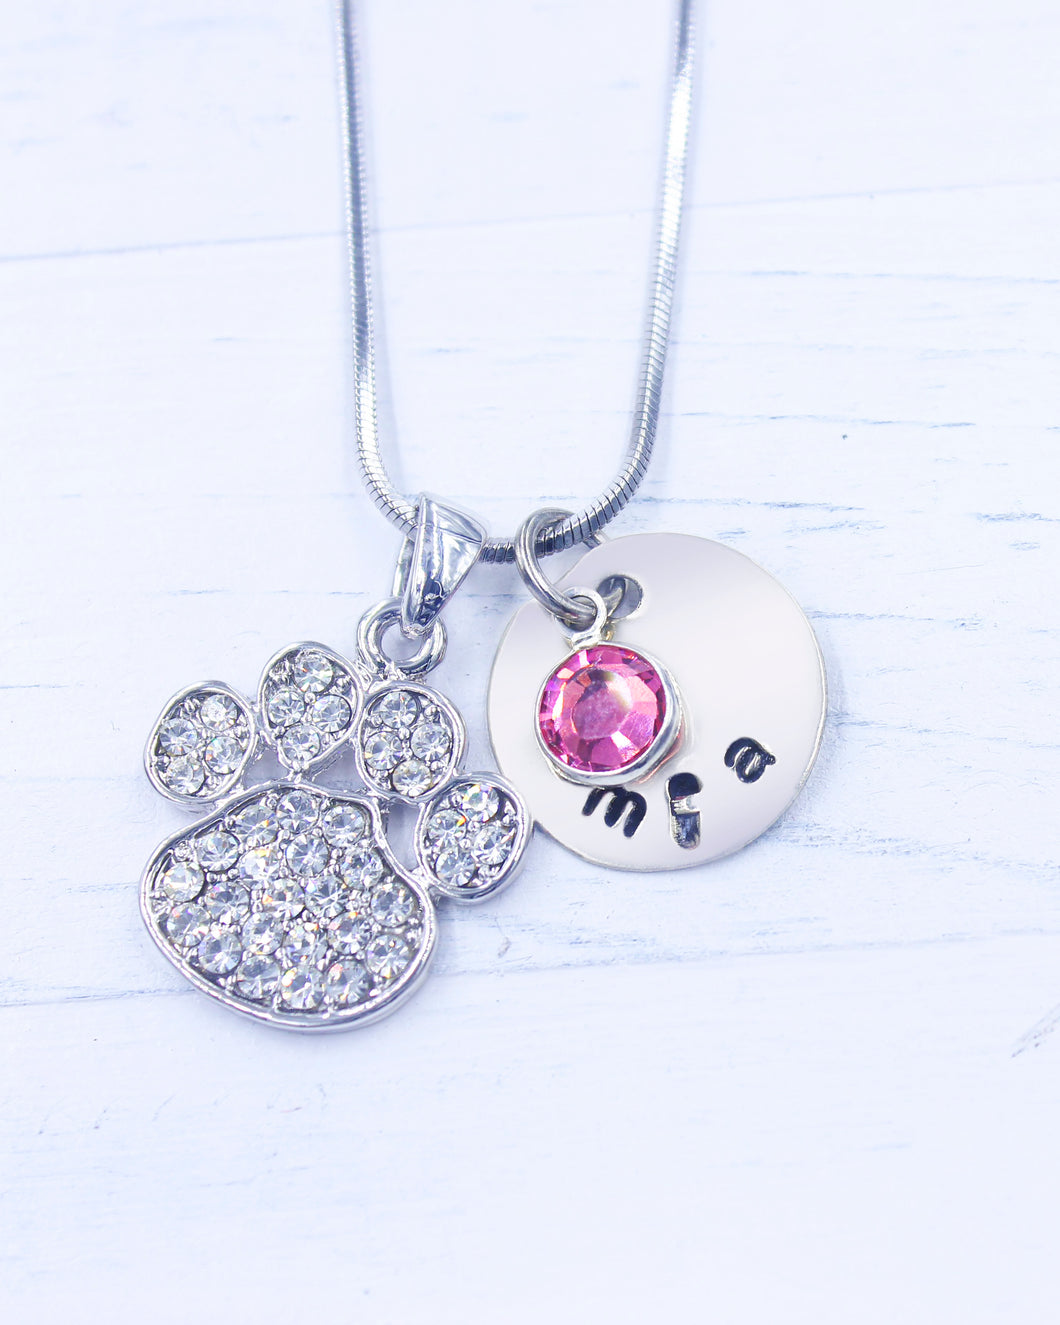 Dog Paw Necklace | Dog Paw Gift | Personalized Necklace | Christmas gifts for mom | Christmas gifts for women | Christmas gift for her